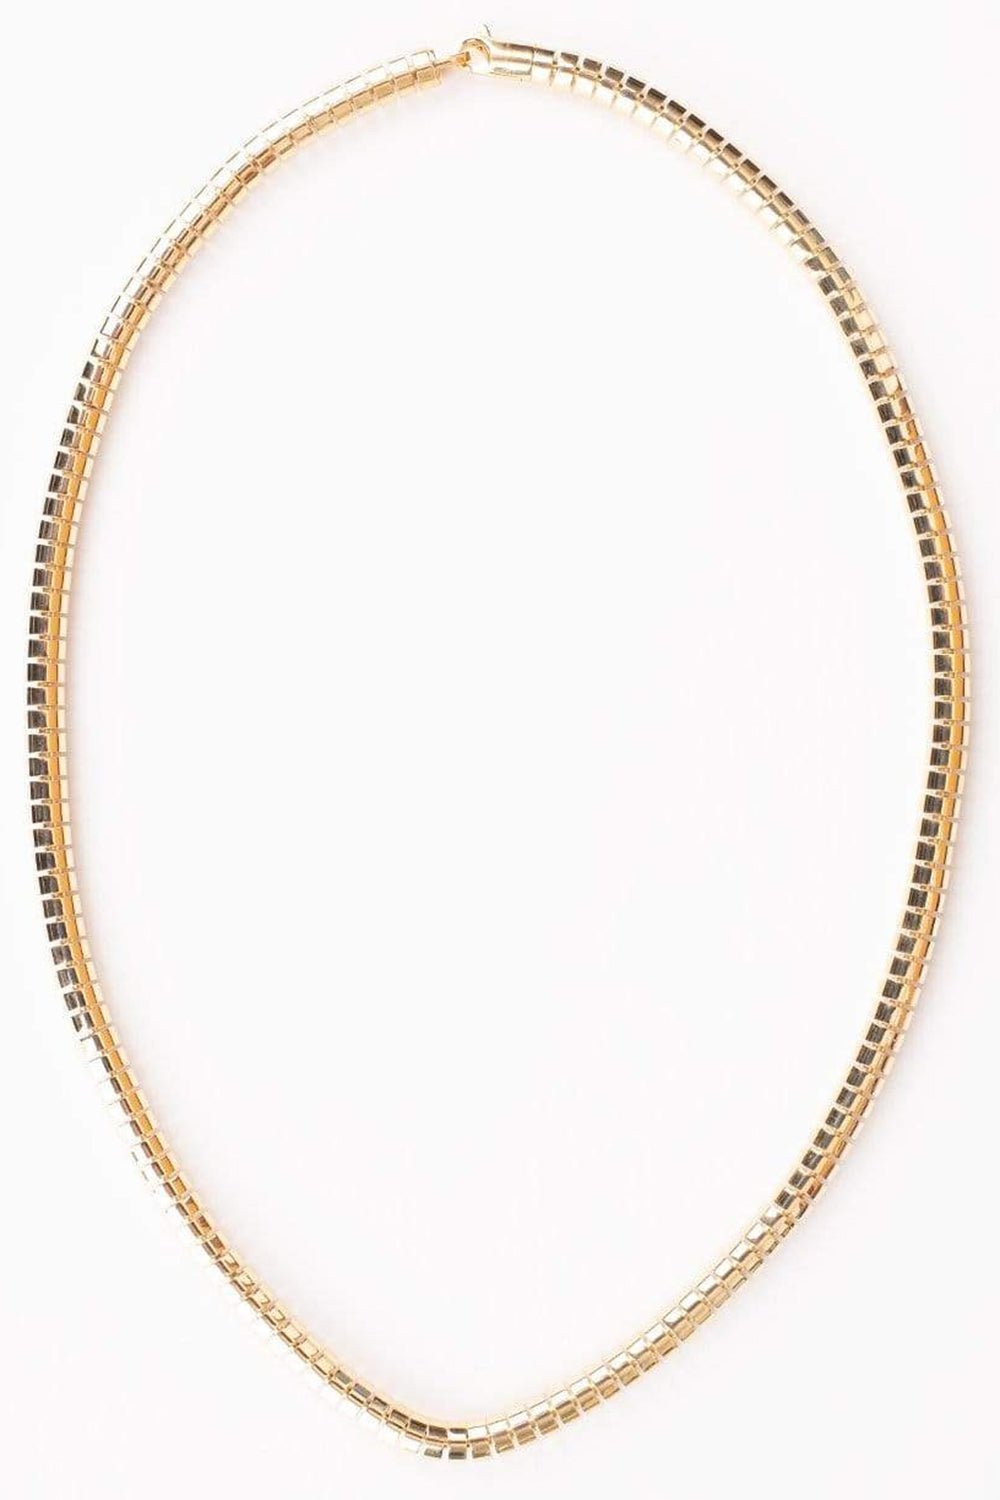 SIDNEY GARBER-Yellow Gold Ophelia Necklace 28IN-YELLOW GOLD